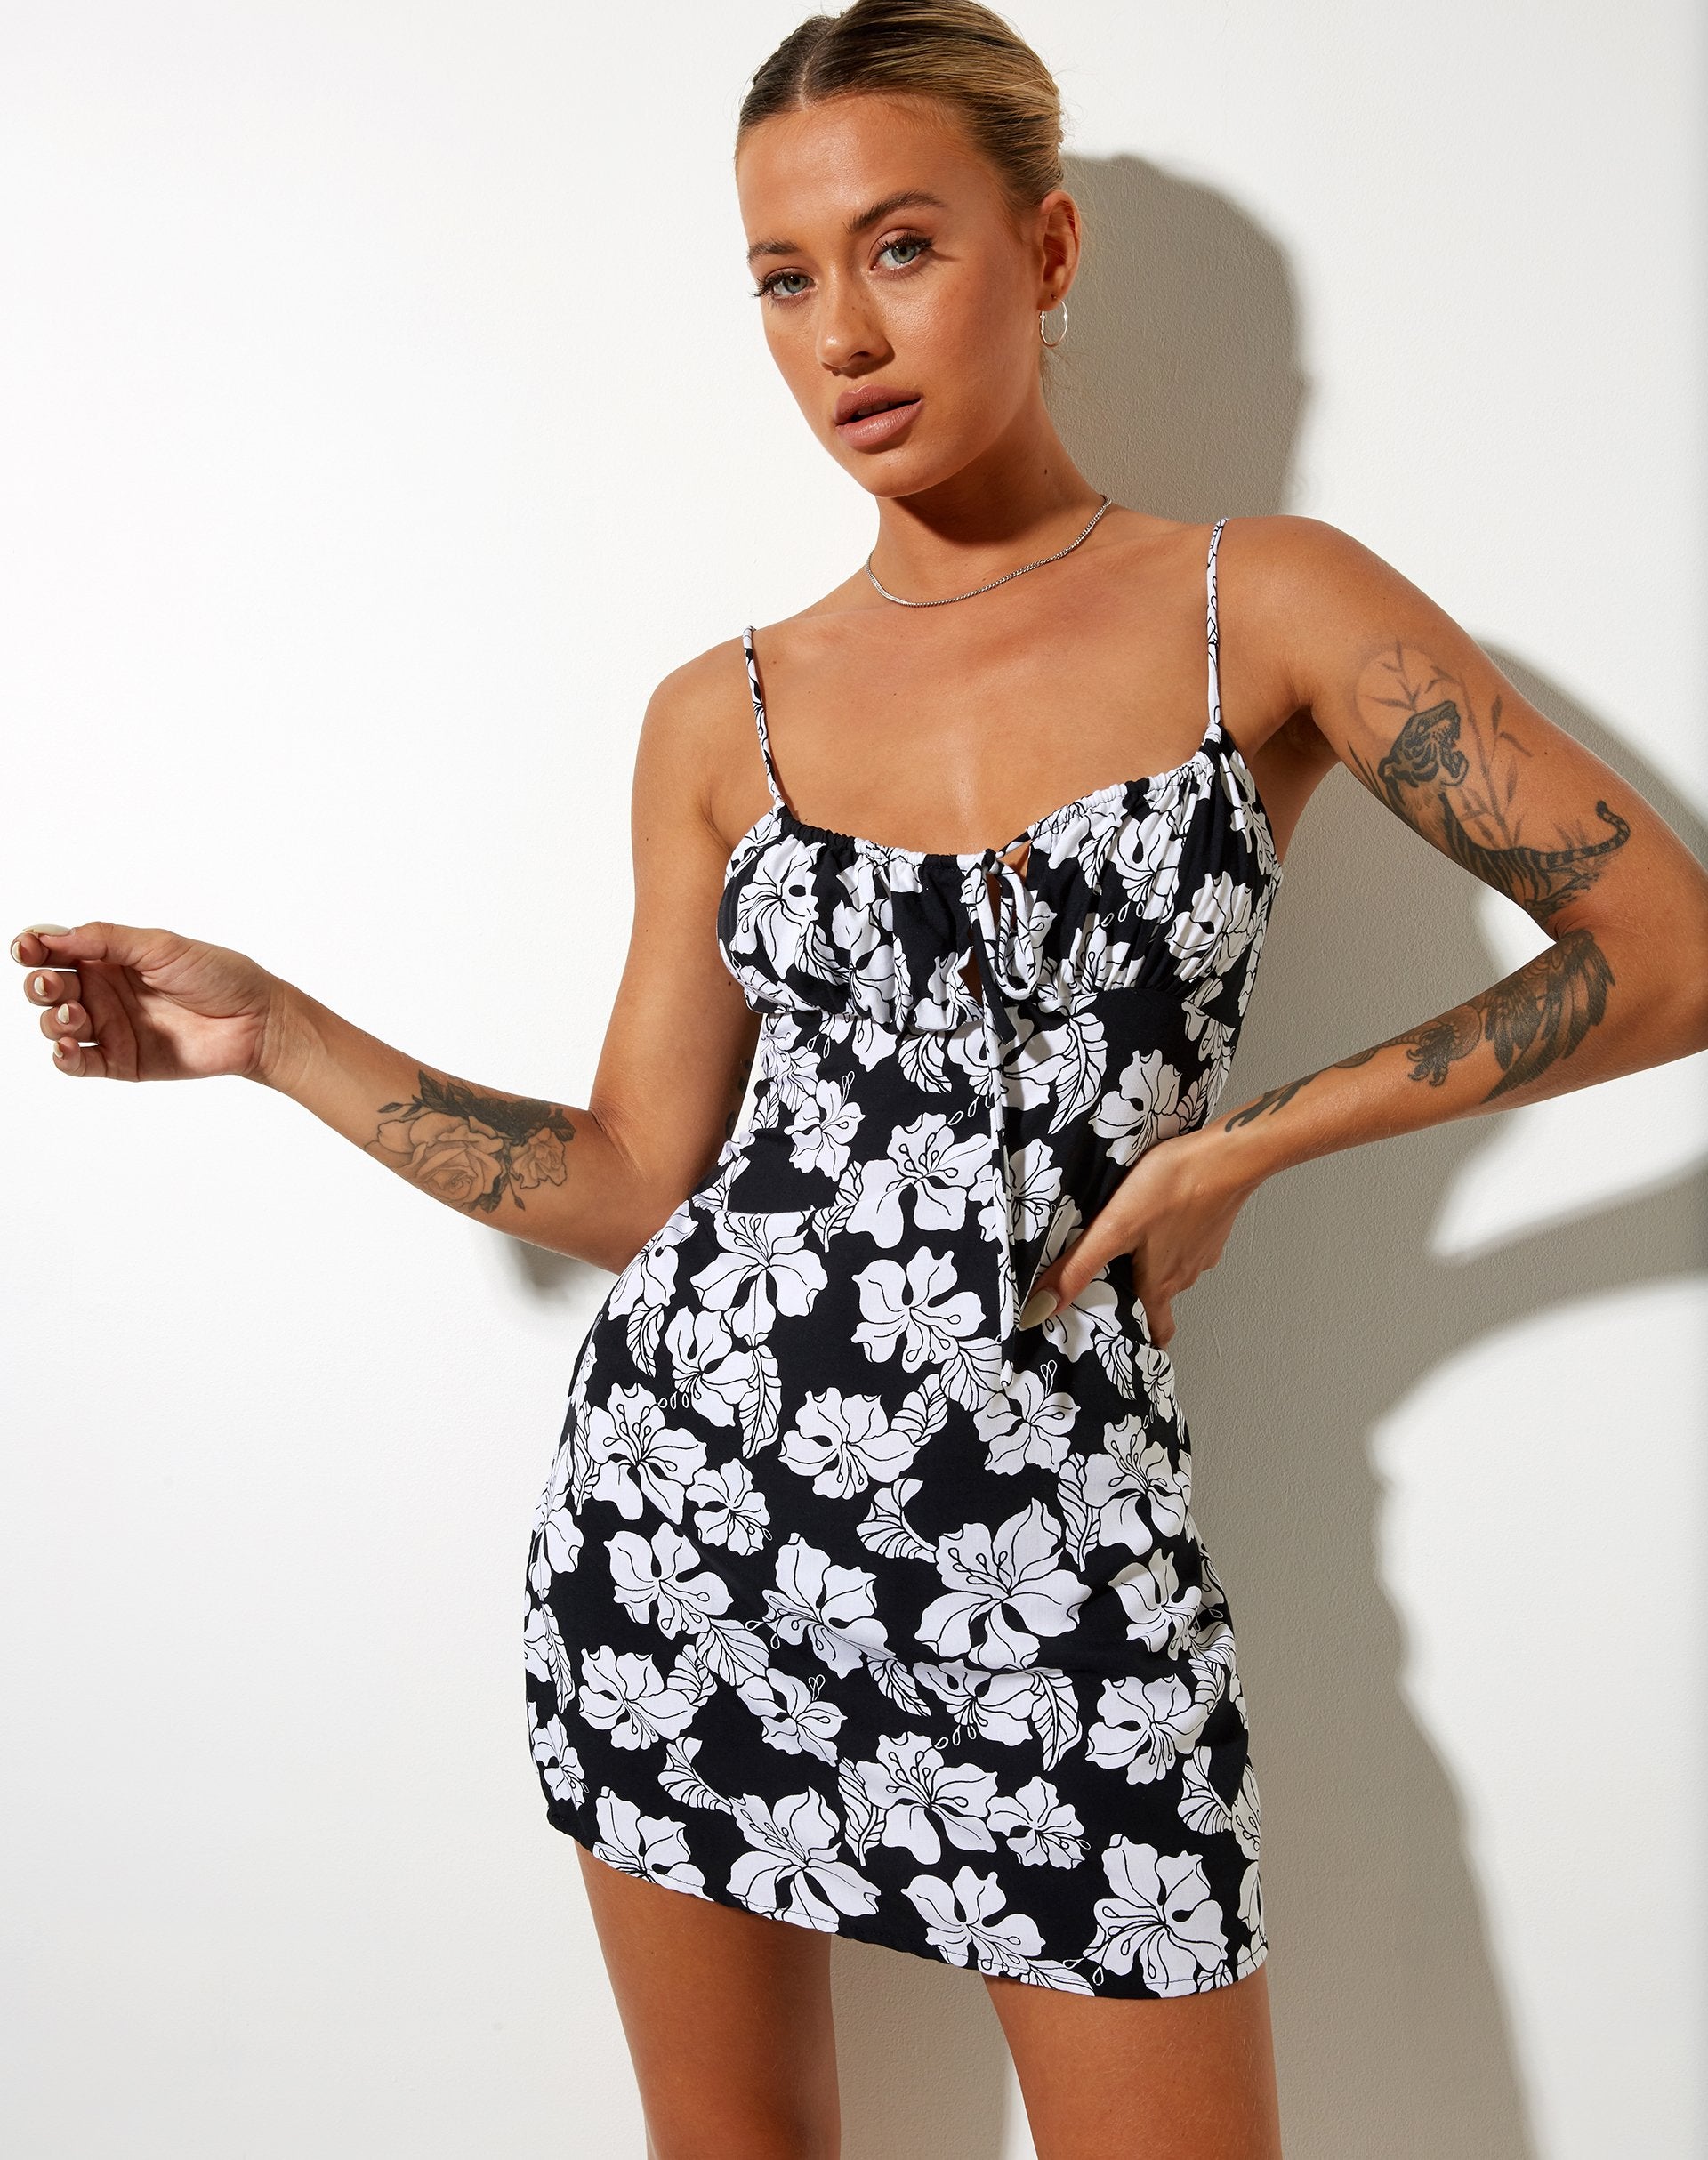 Image of Mala Slip Dress in Vacation Black and White